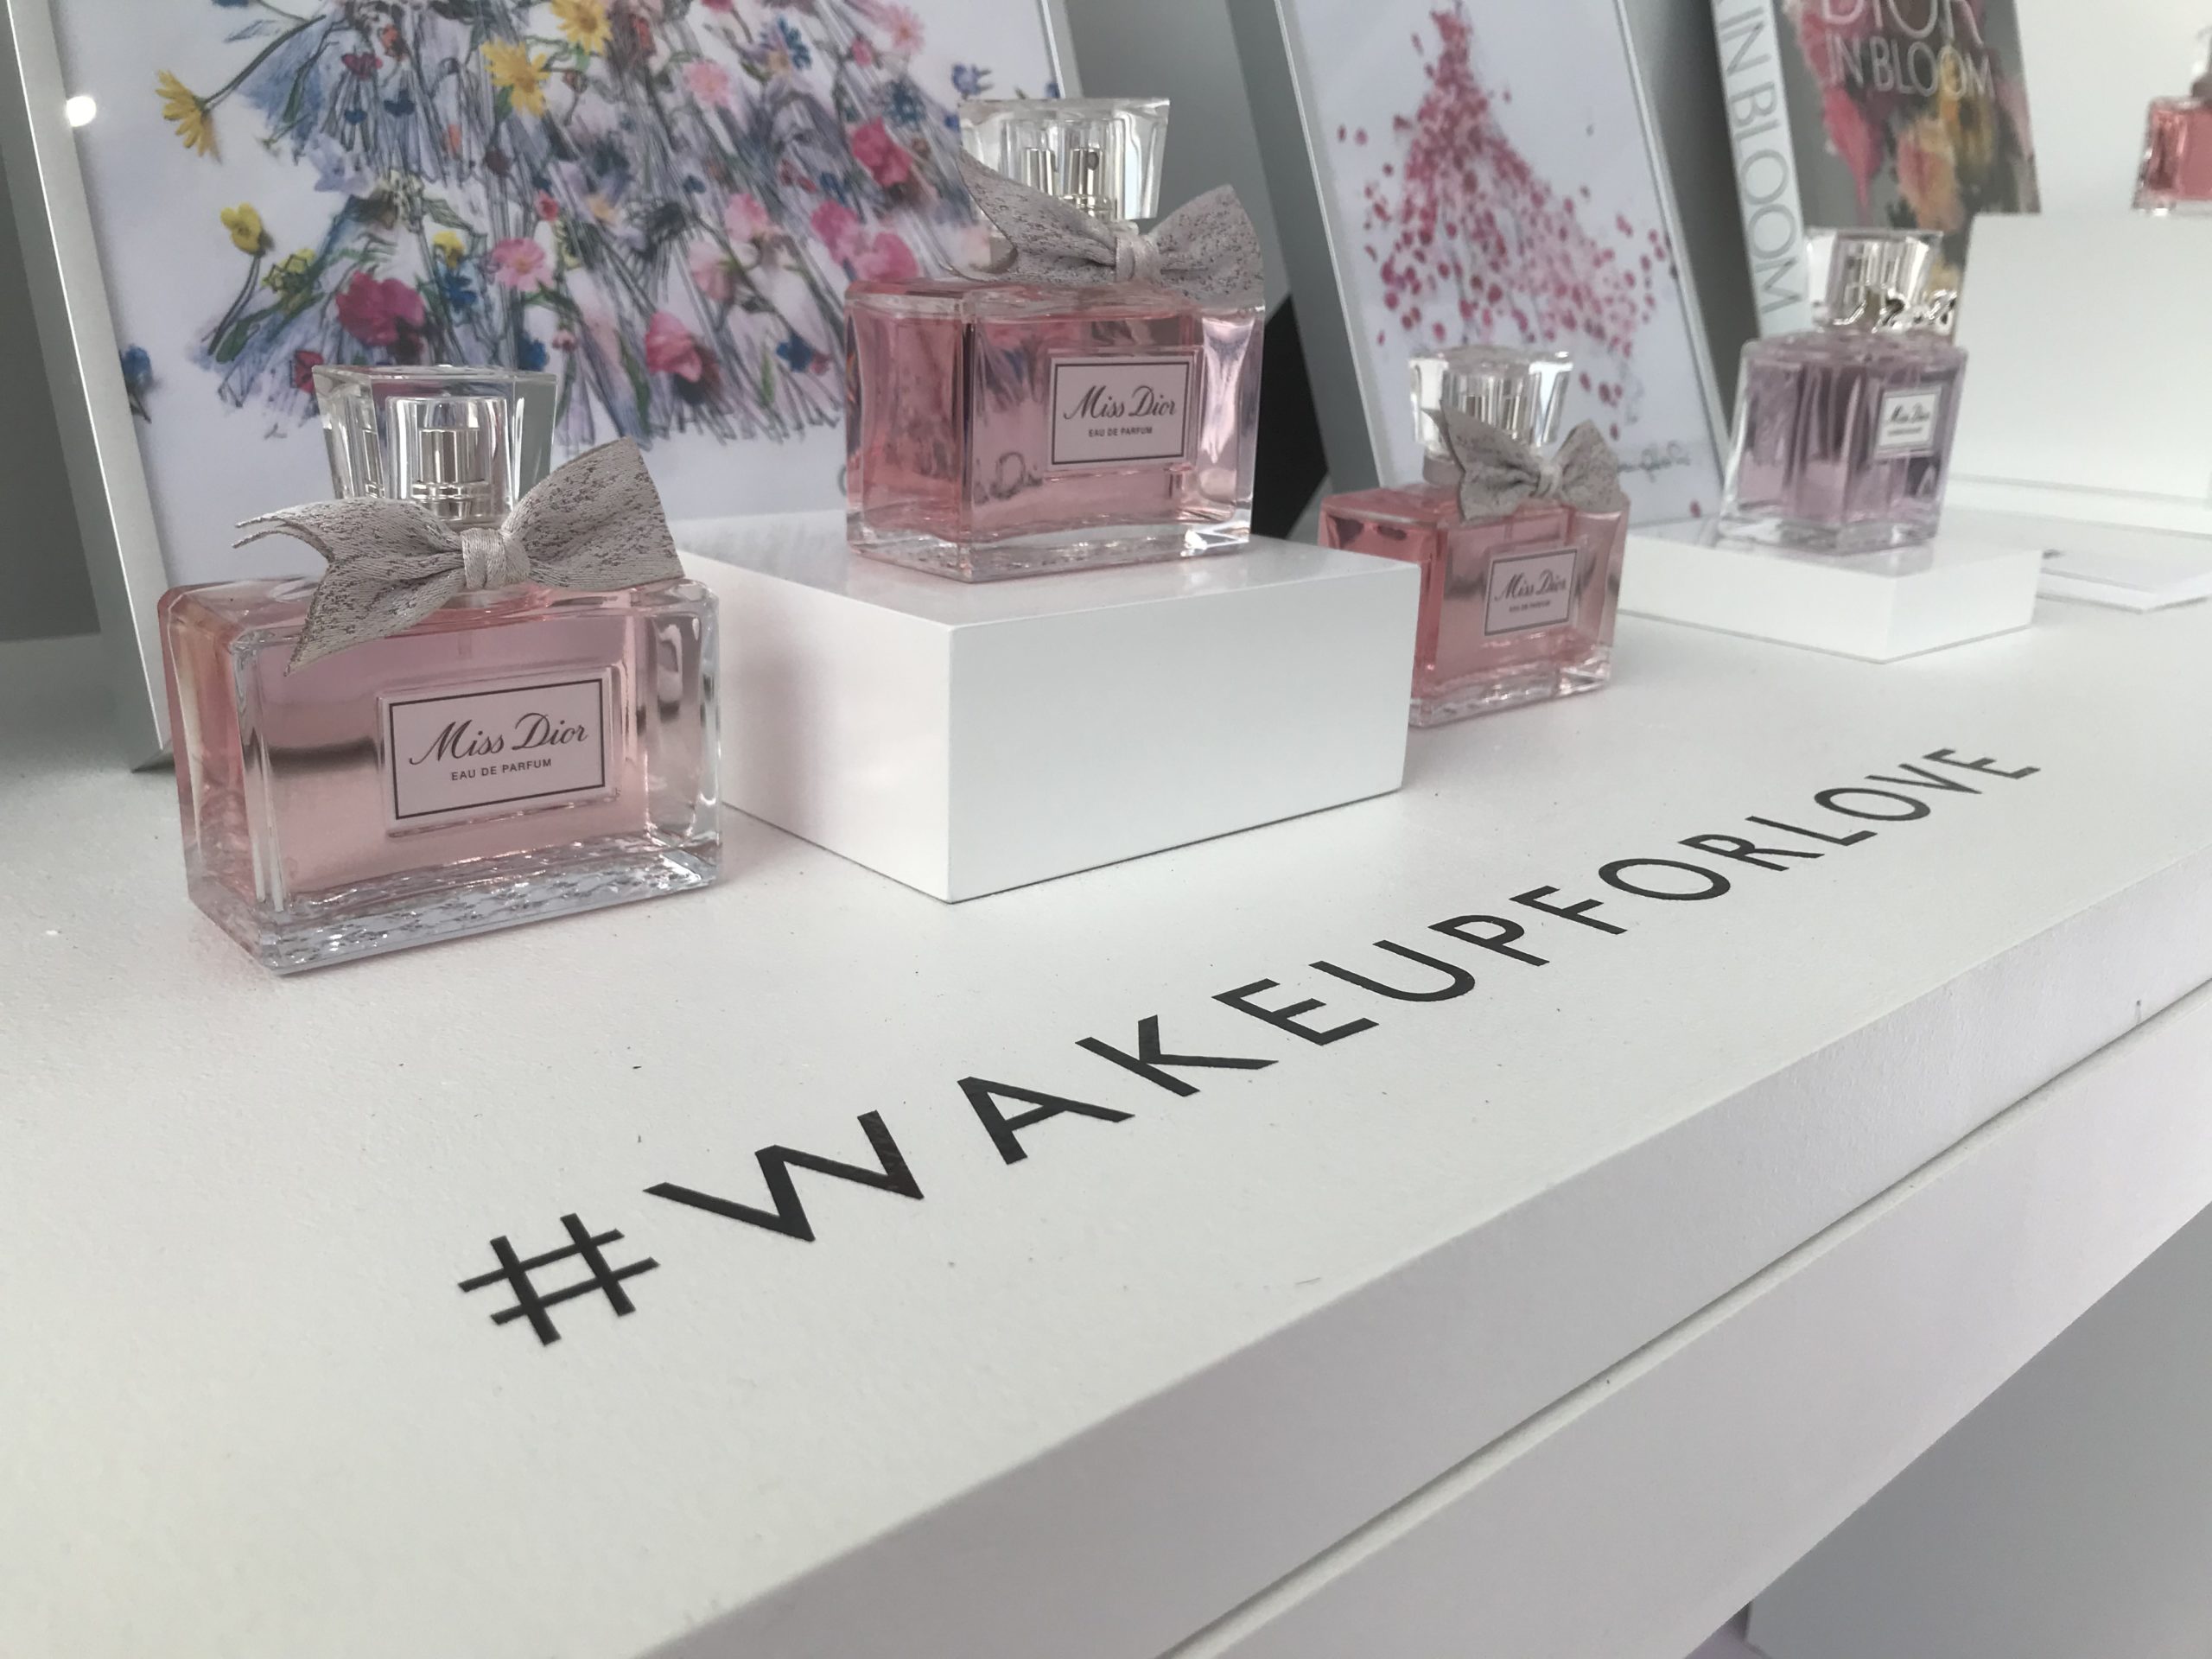 Dior Relaunches Its Iconic Perfume Miss Dior With a Floral Pop-Up